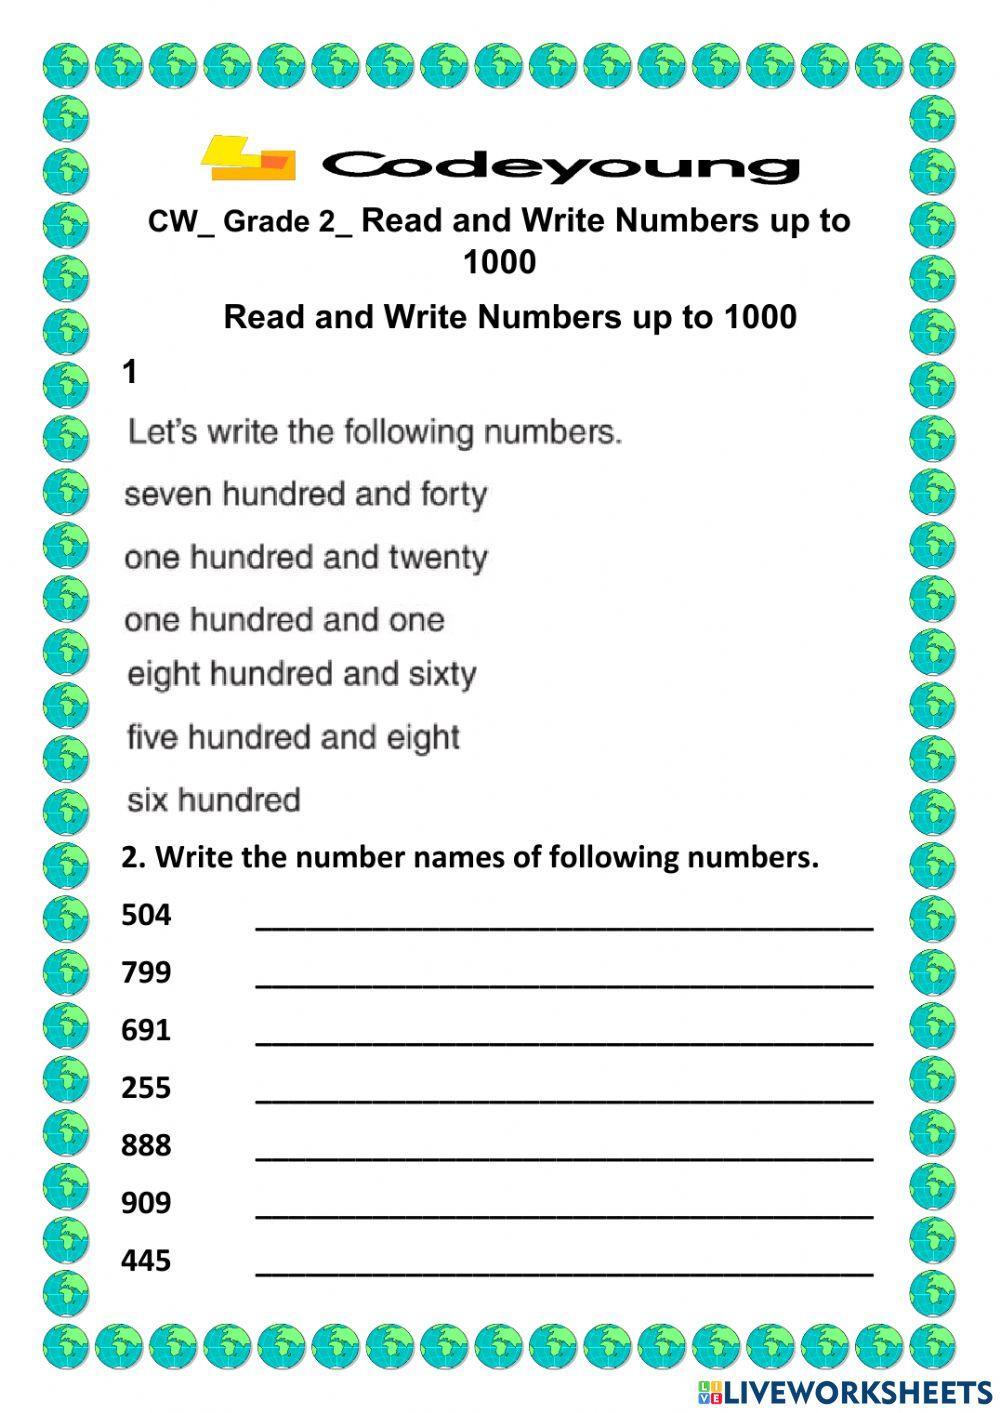 Read and Write Numbers up to 1000